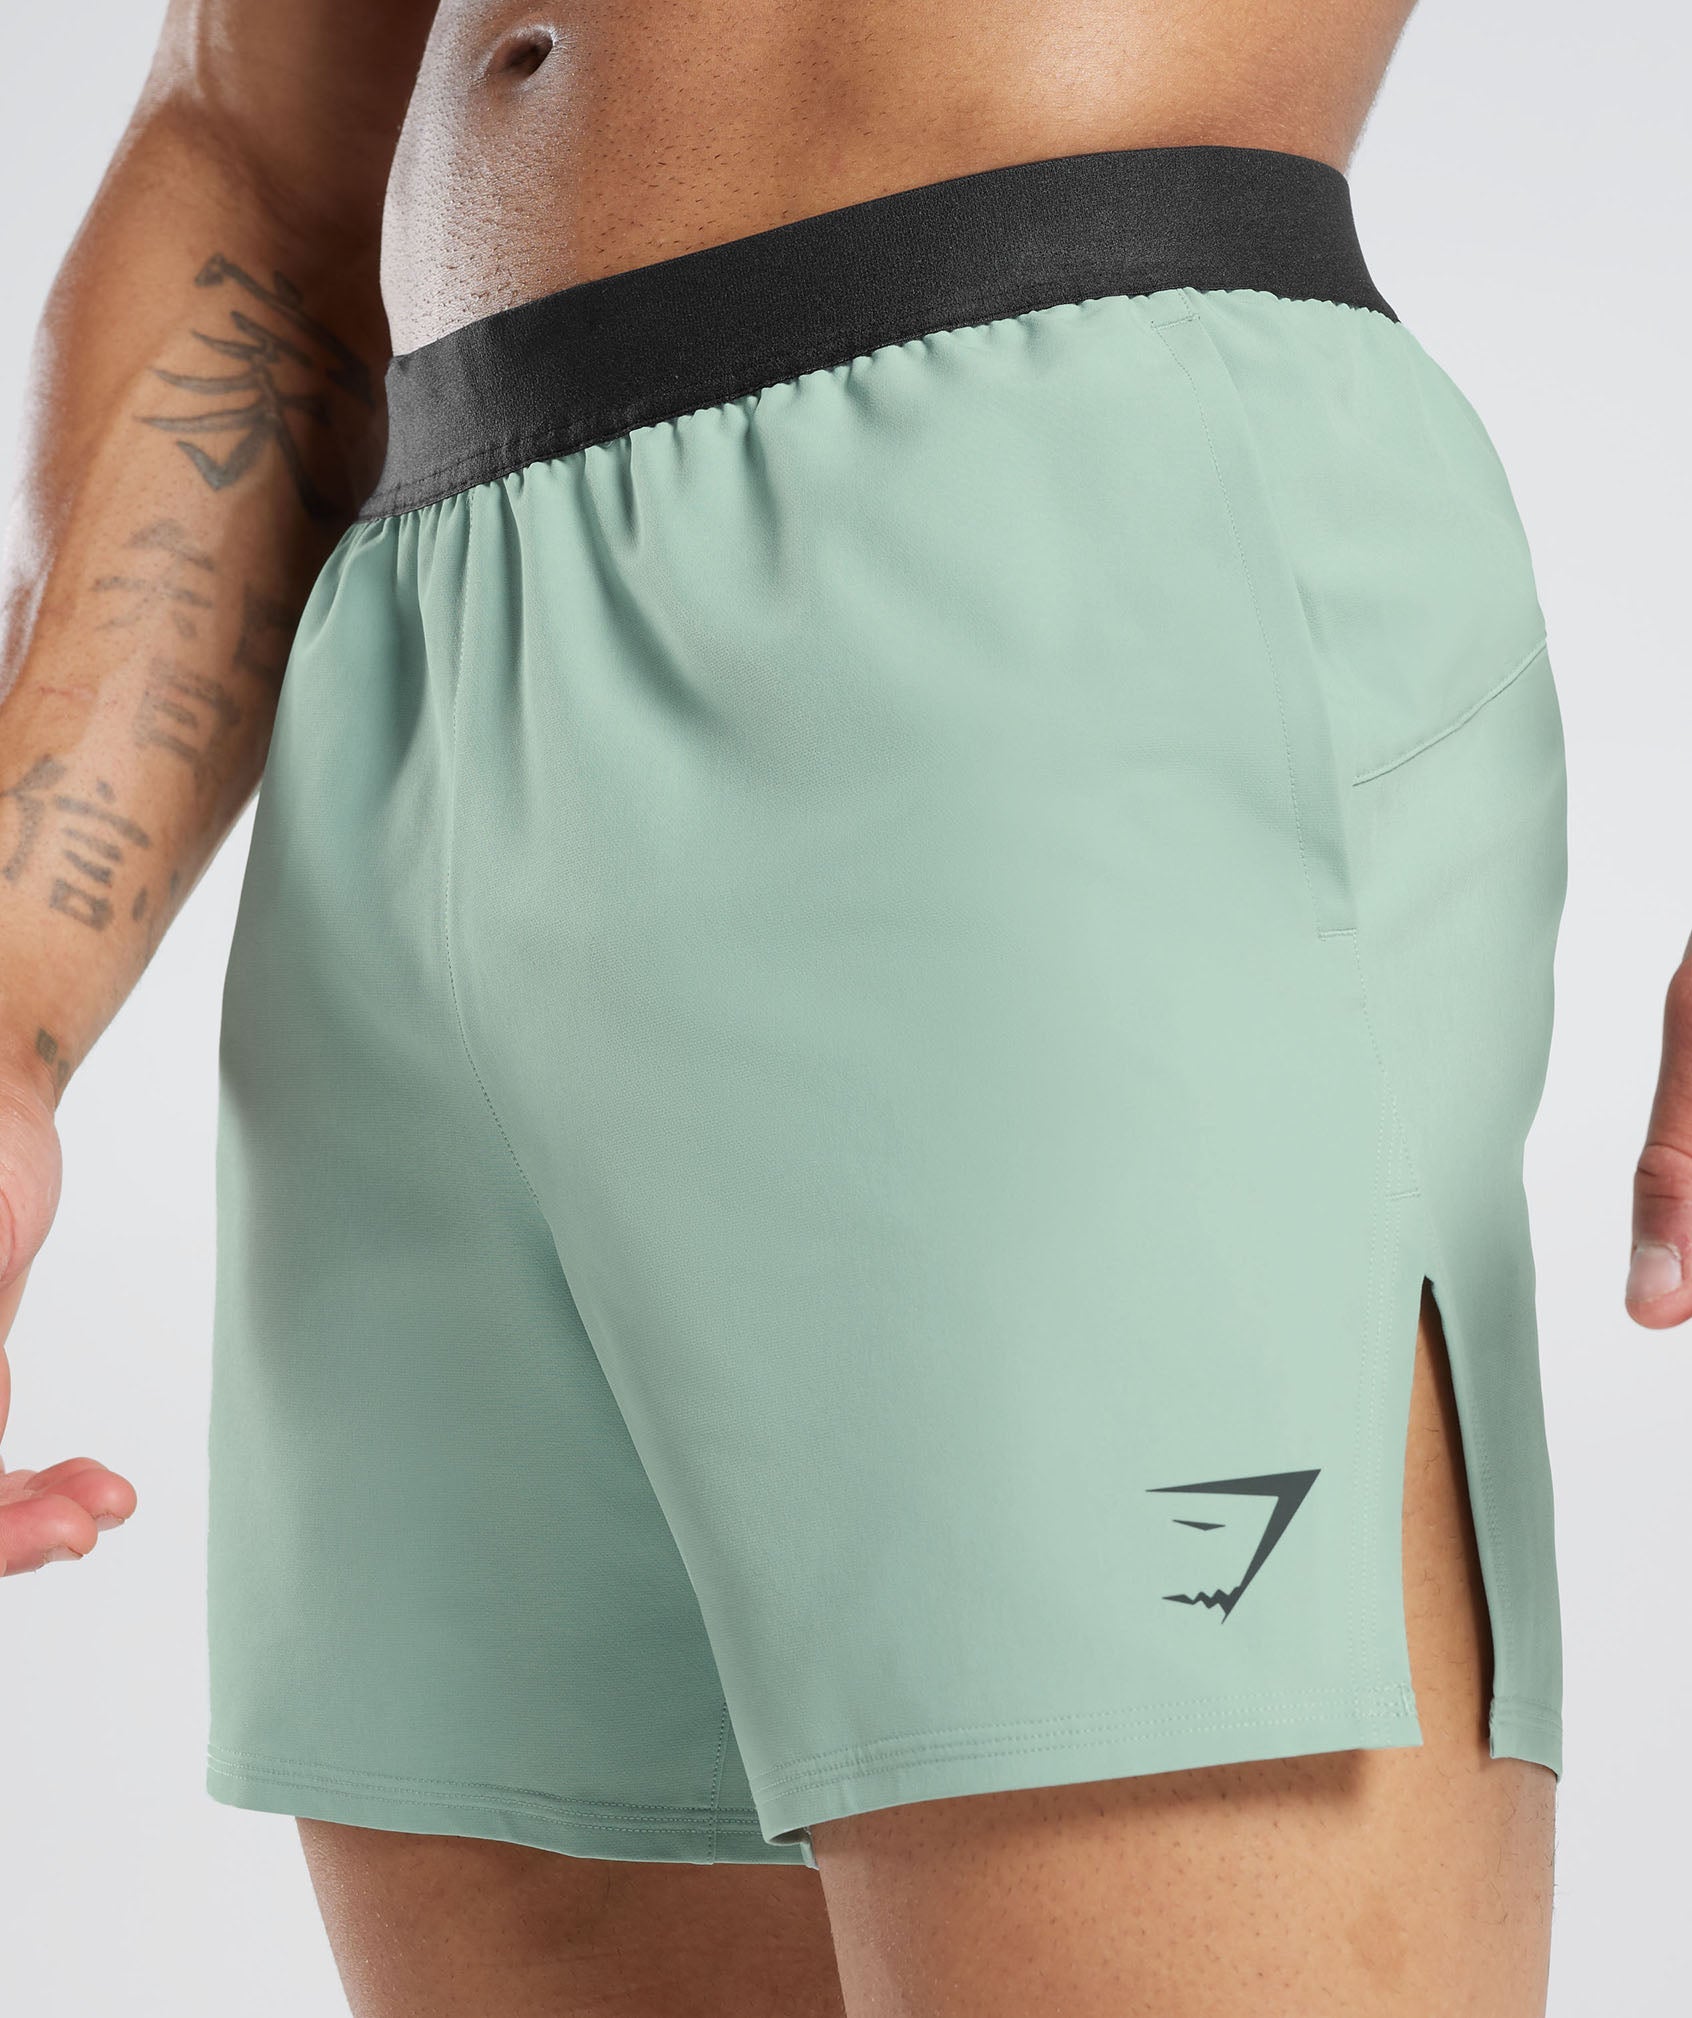 315 Woven Shorts in Frost Teal - view 5